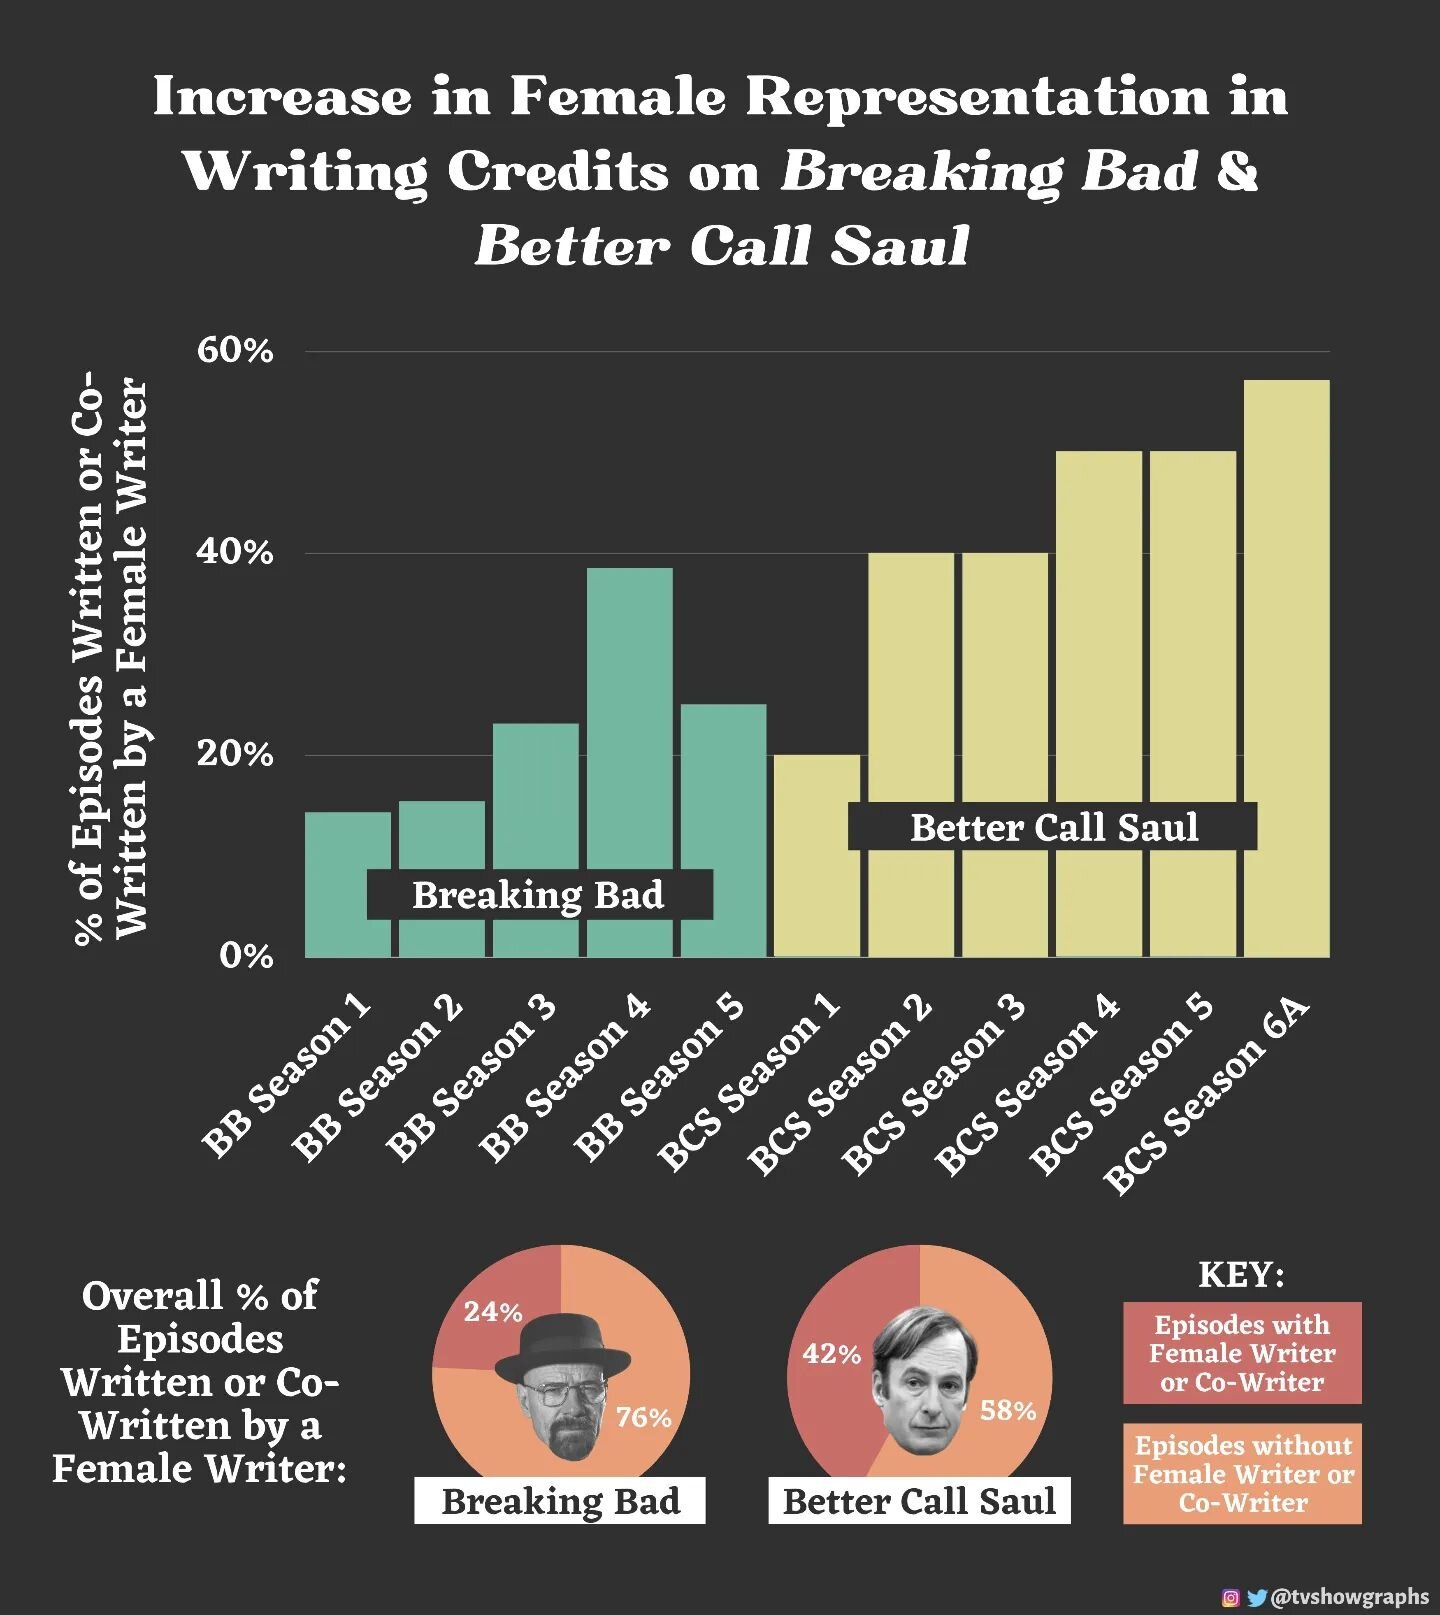 I've been wanting to dive into more data around representation and television (both in front of the camera and behind it), and a recent tweet about Better Call Saul inspired me to look at some data around writing credits across both Breaking Bad and 